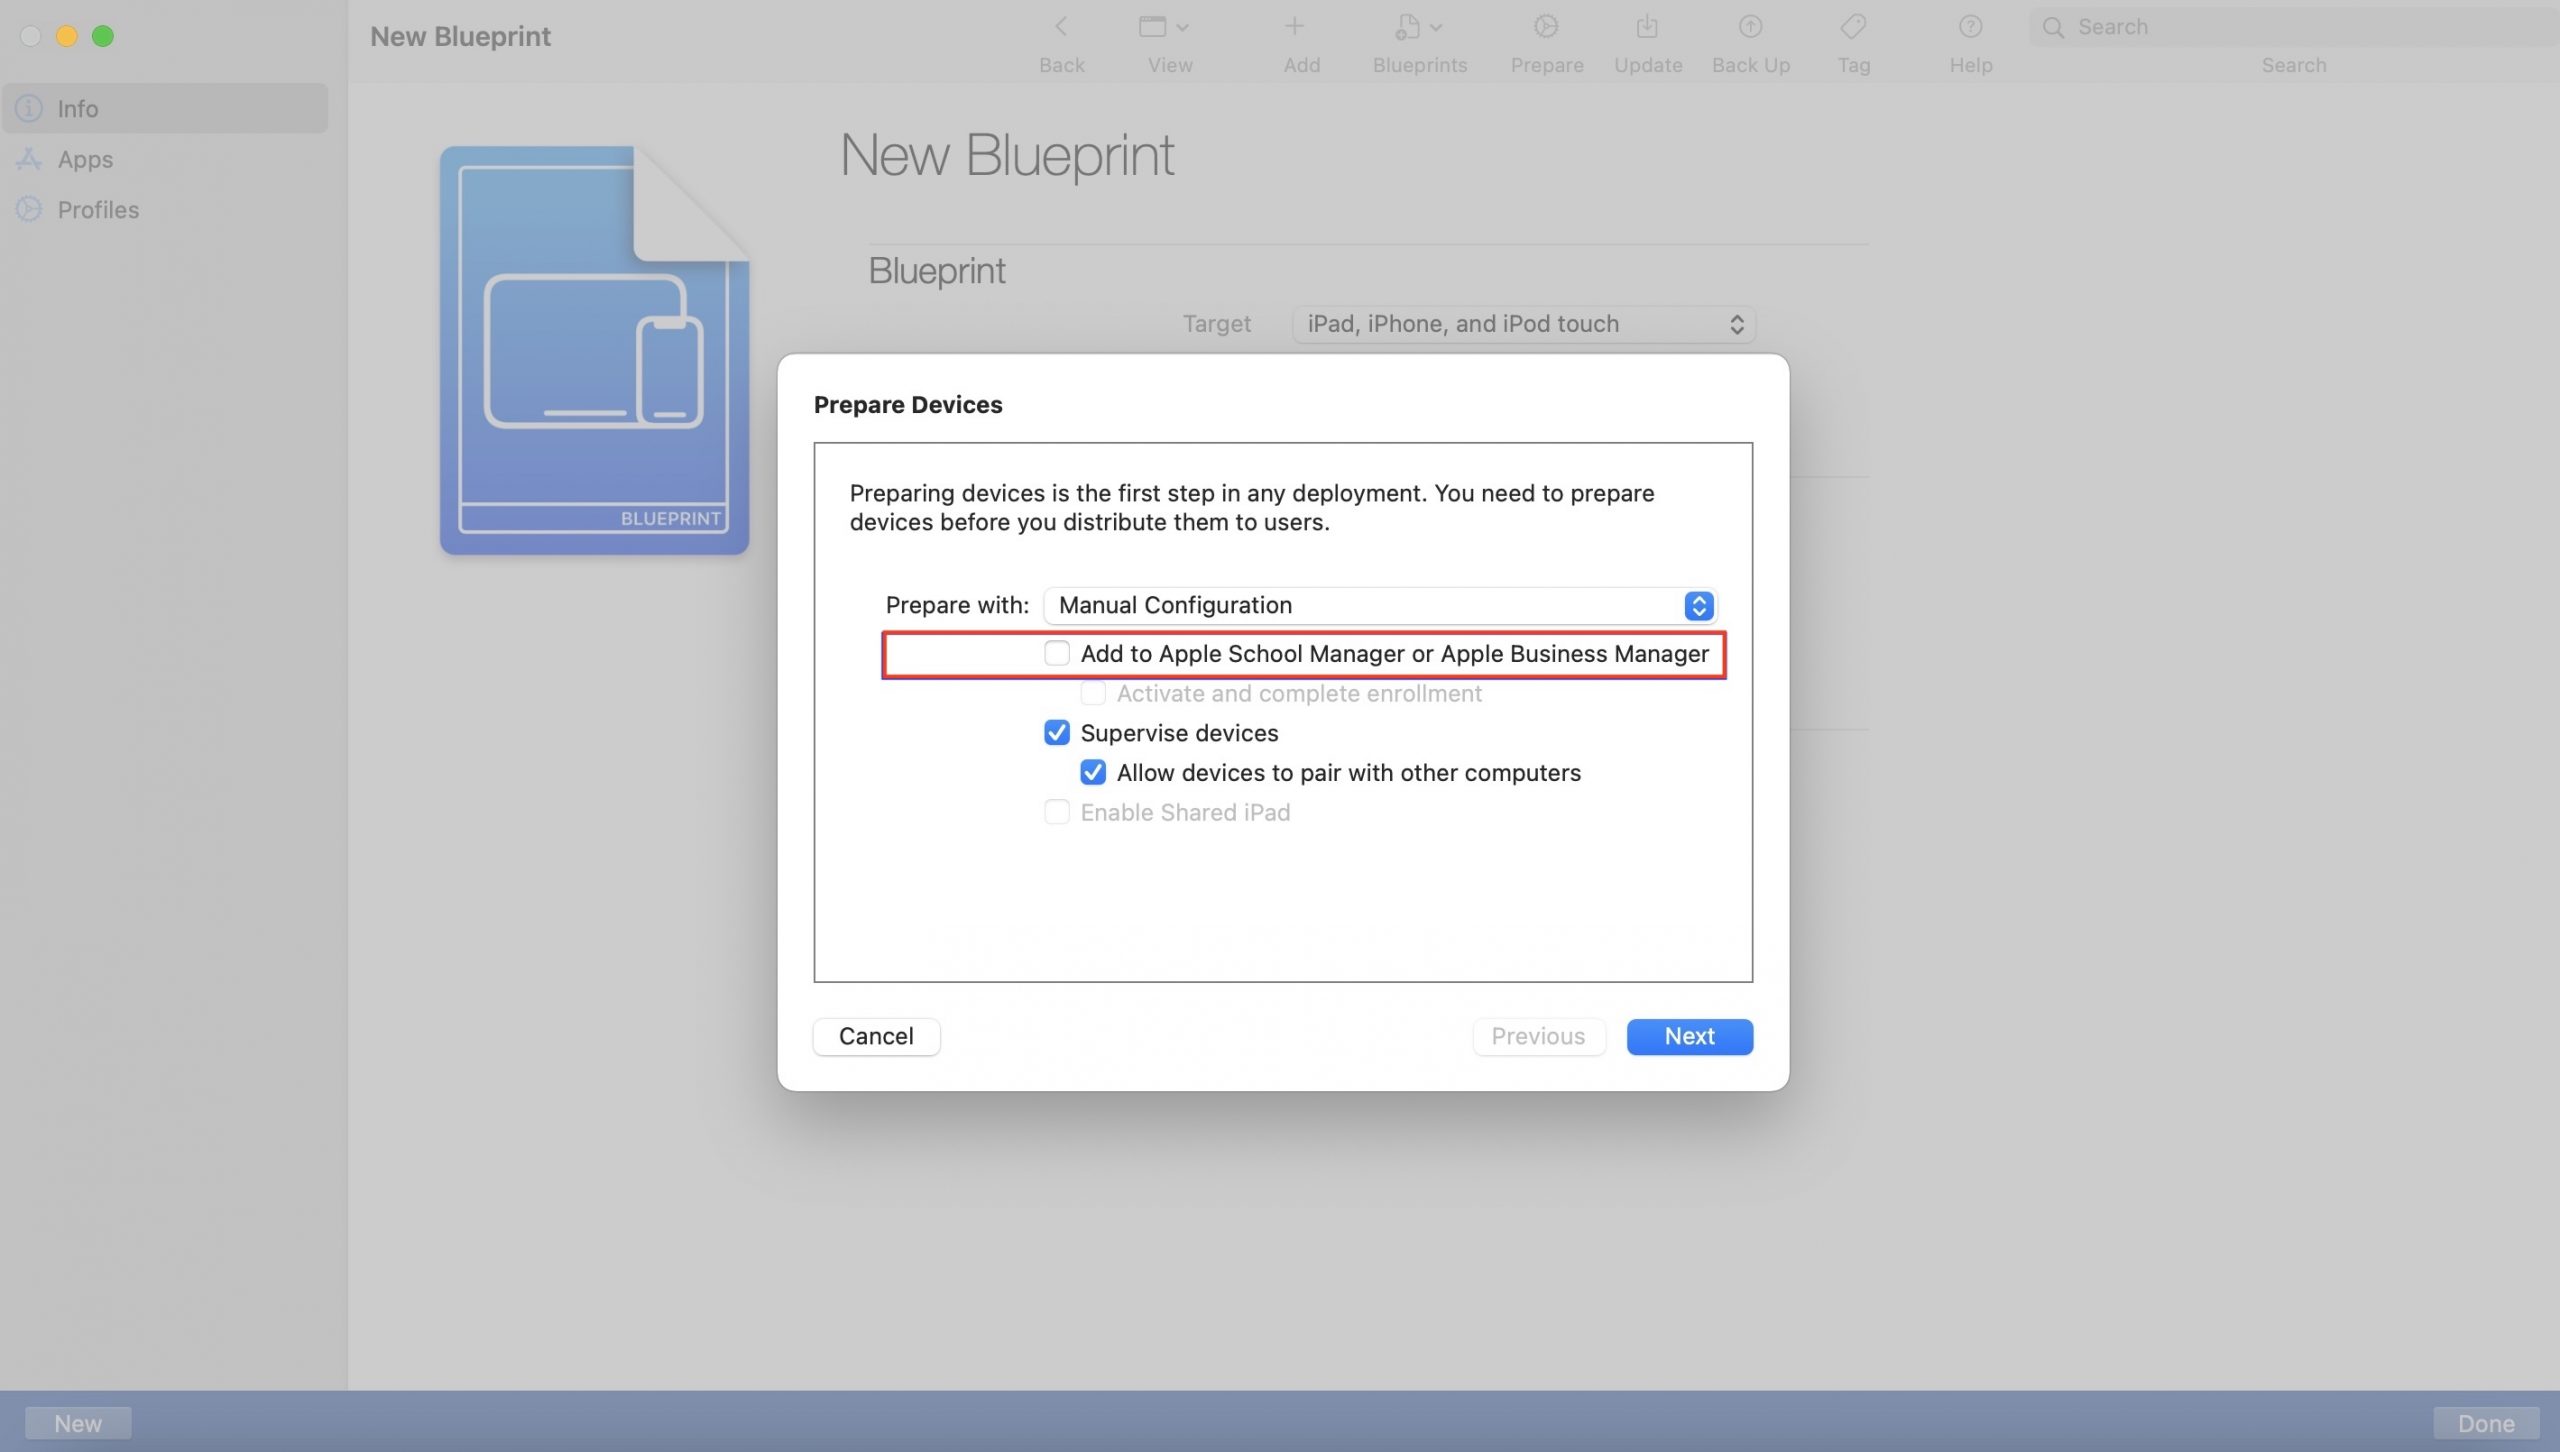 Uncheck the option Add to Apple School Manager/Apple Business Manager while configuring the Blueprint